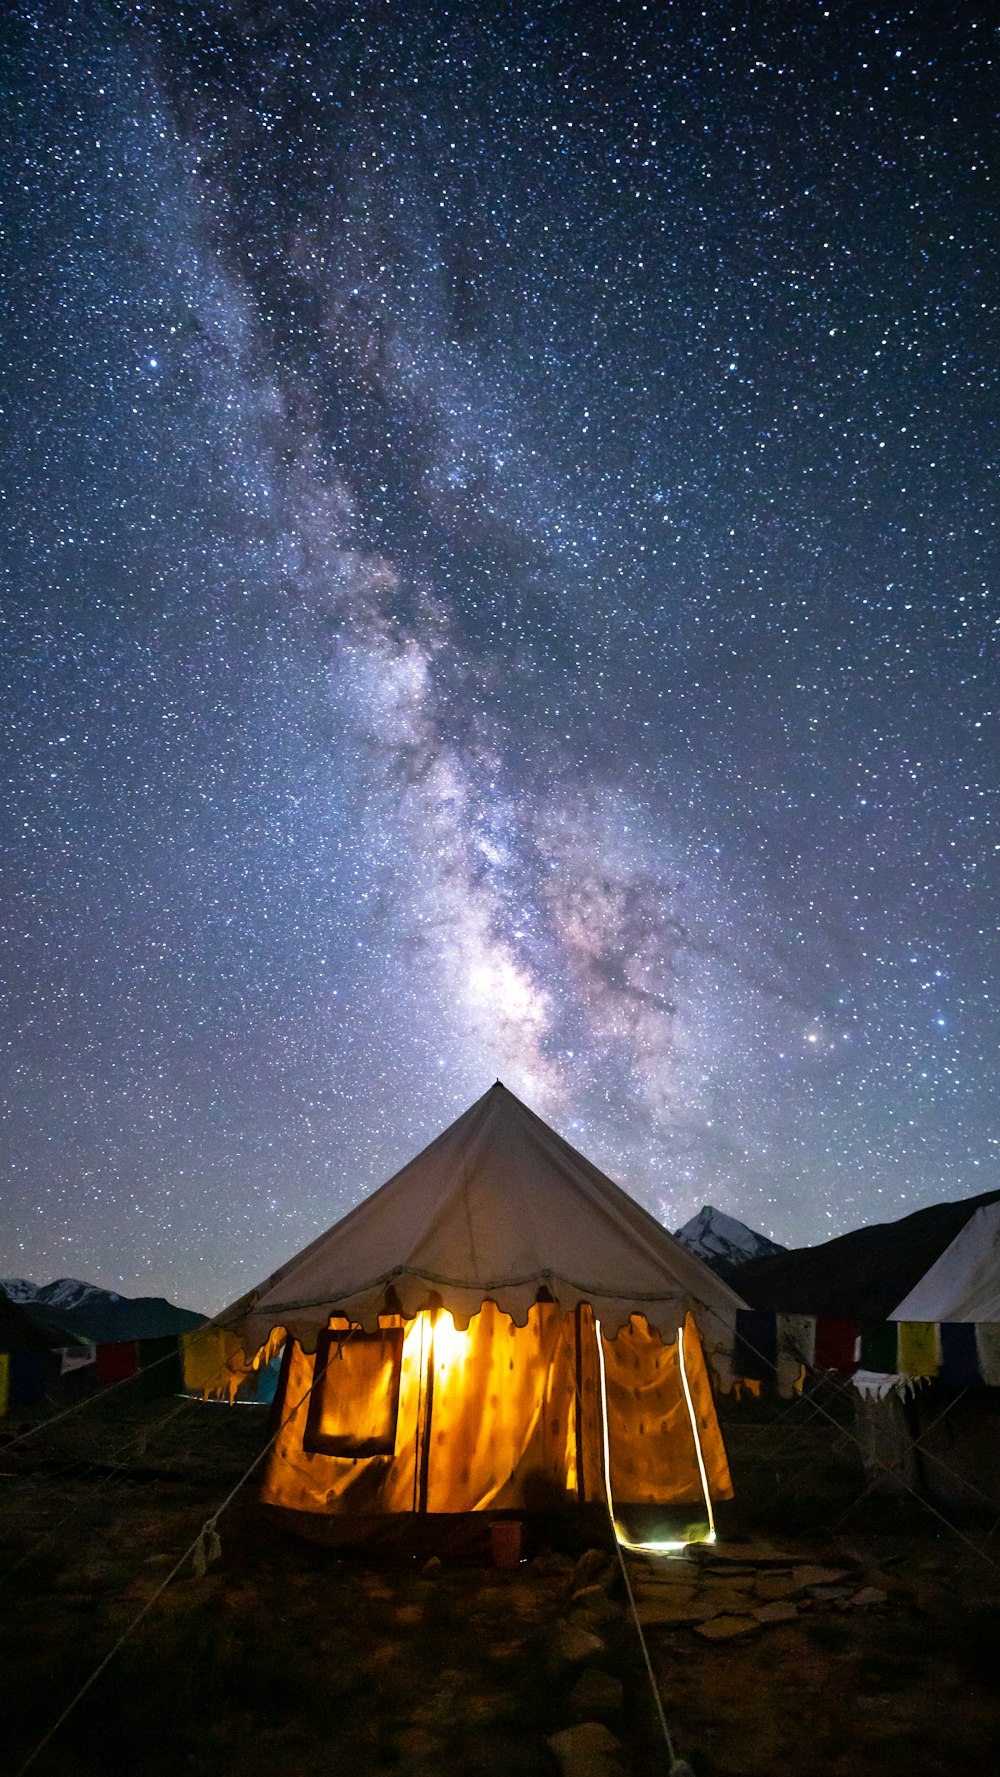 a tent under a night sky filled with stars